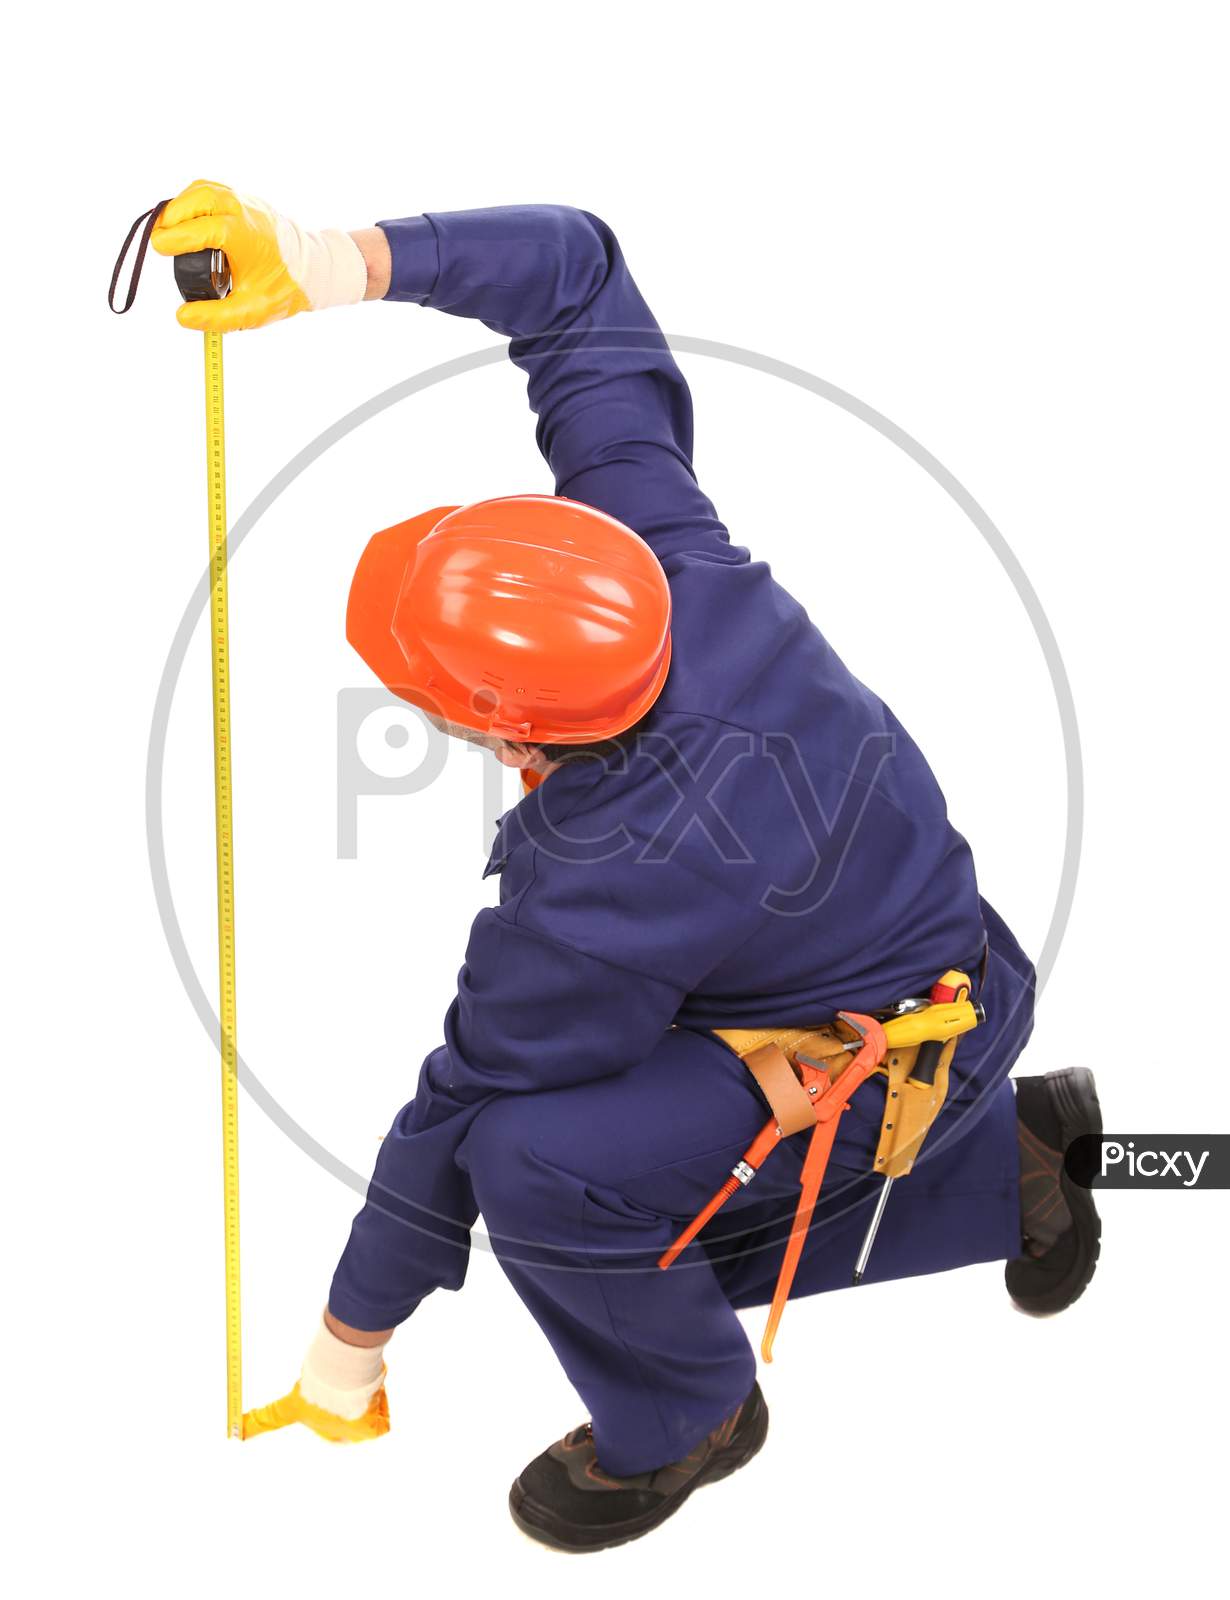 Worker In Hard Hat Measure With Ruler. Isolated On A White Background.